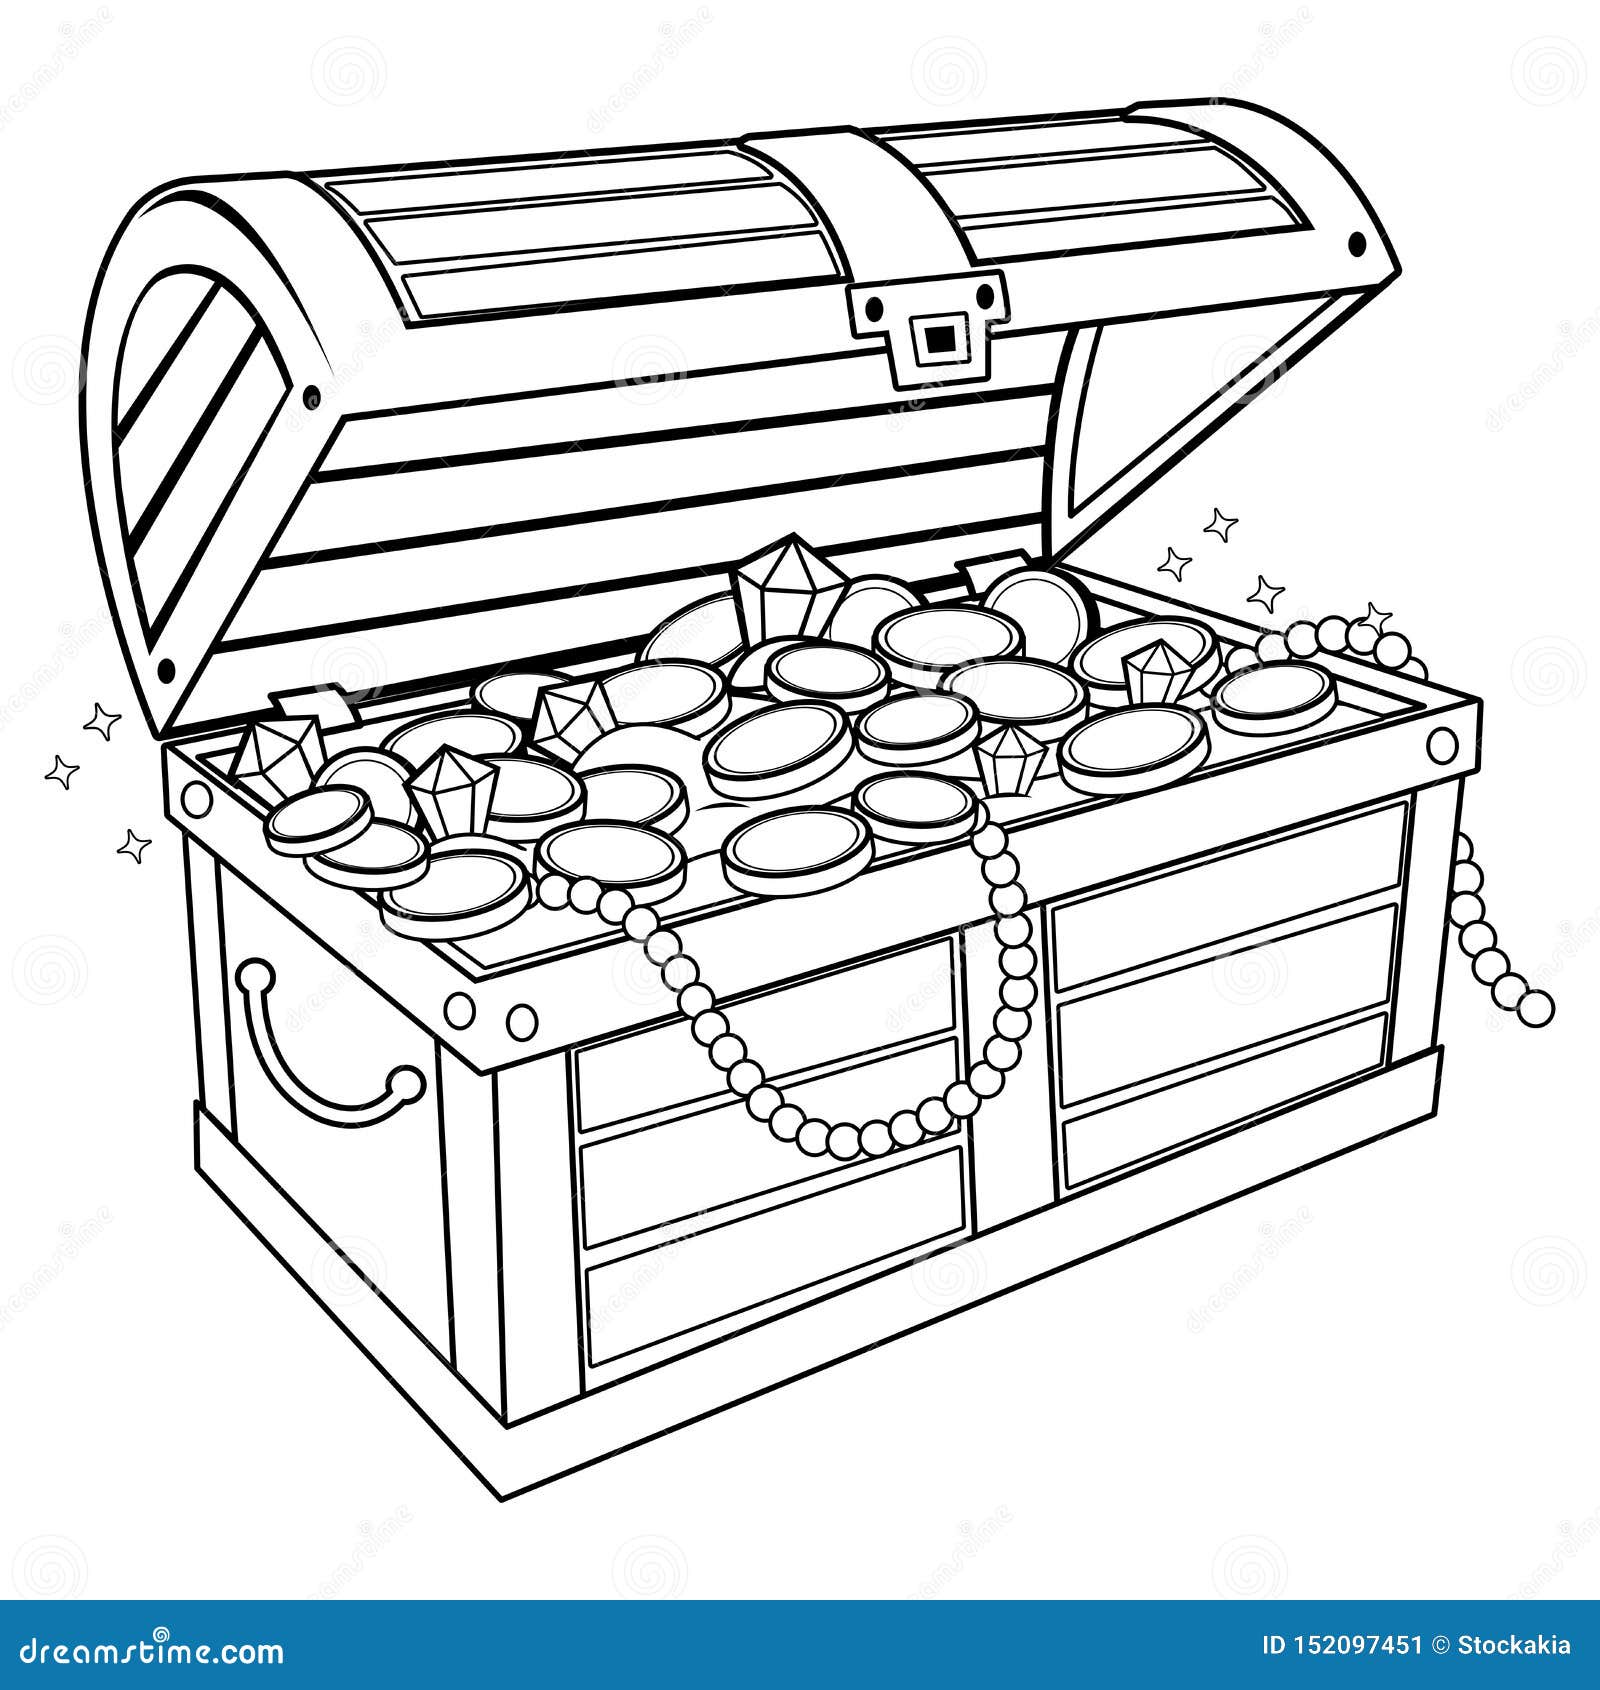 Treasure chest filled with gold treasure gold coins diamonds pearls and jewelry vector black and white coloring page stock vector